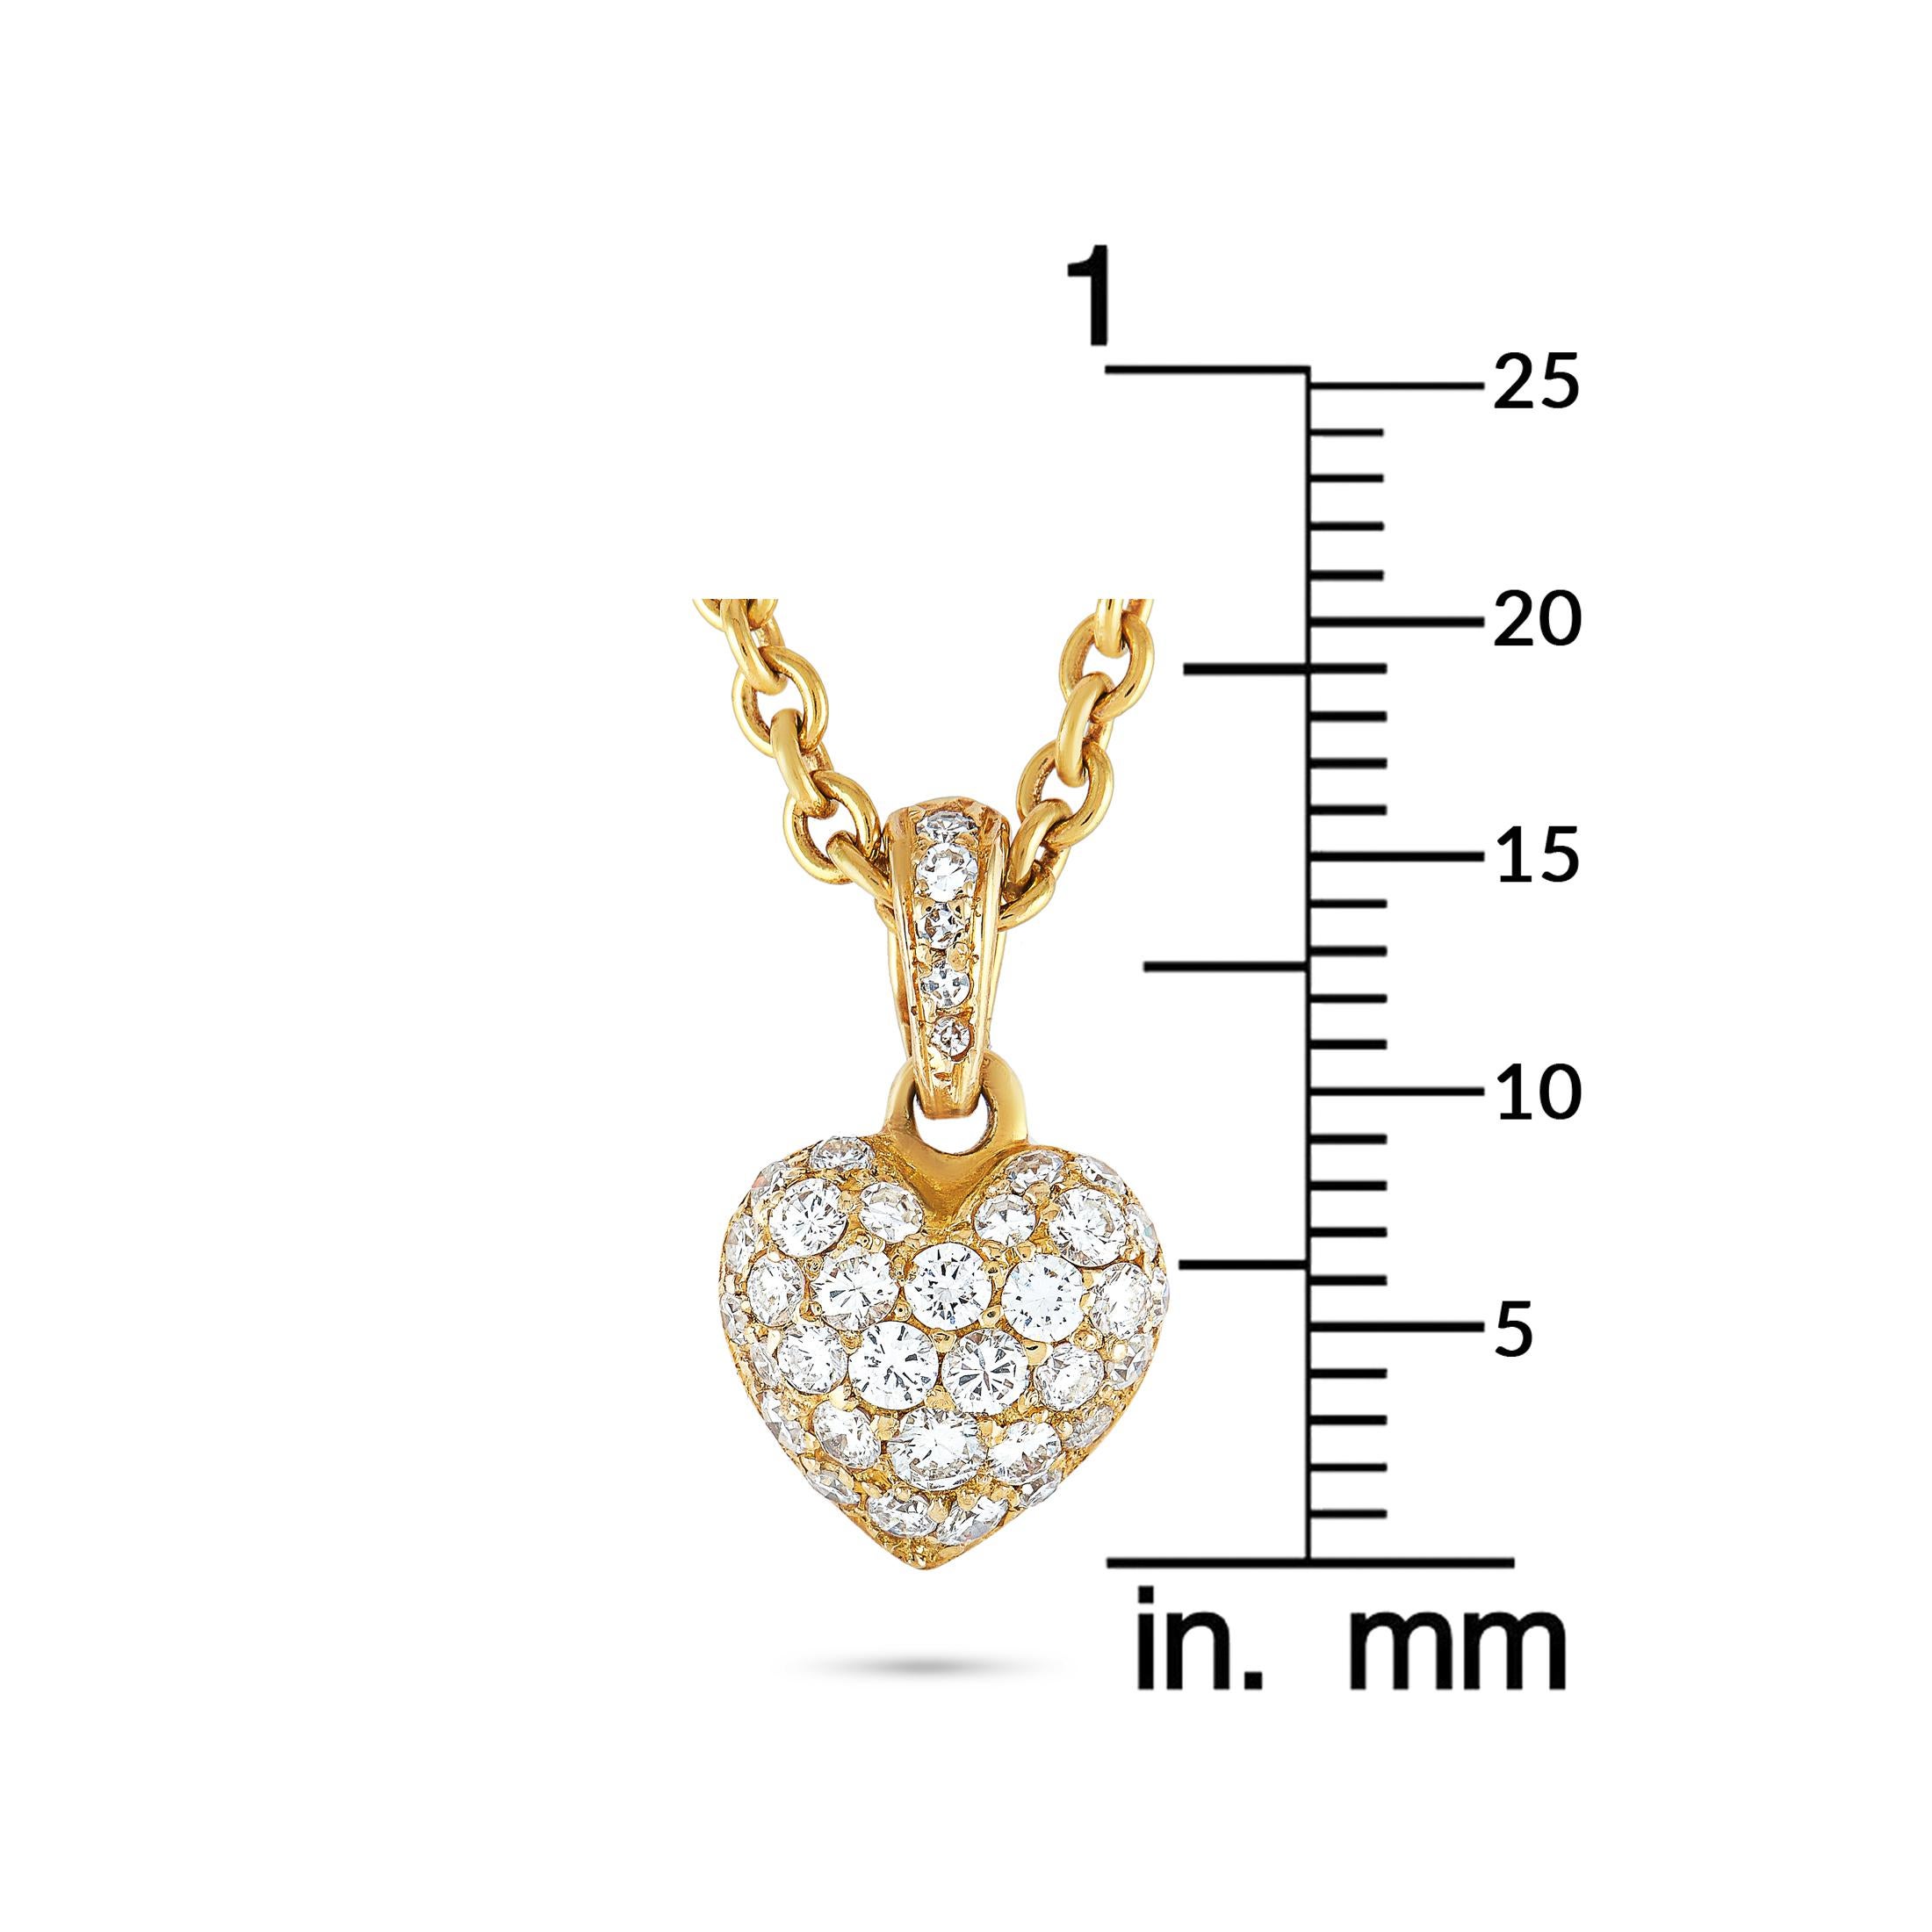 This Cartier necklace is made out of 18K yellow gold and diamonds and weighs 9.6 grams. The diamonds boast grade F color and VVS clarity and amount to approximately 0.85 carats. The necklace is presented with a 16” chain and a heart pendant that